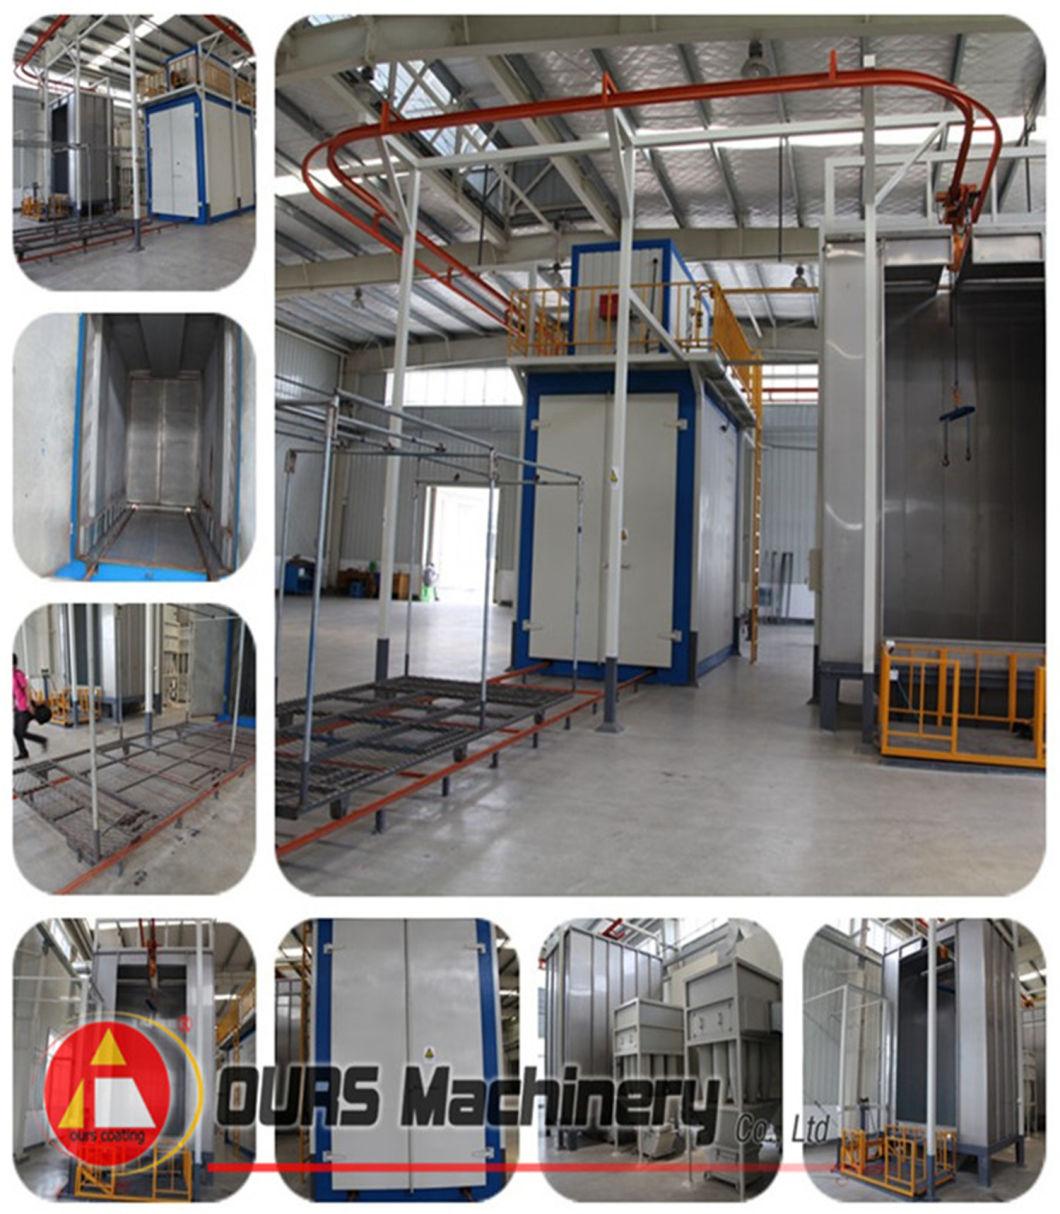 Turn-Key Powder Spraying Line with Imported Parts